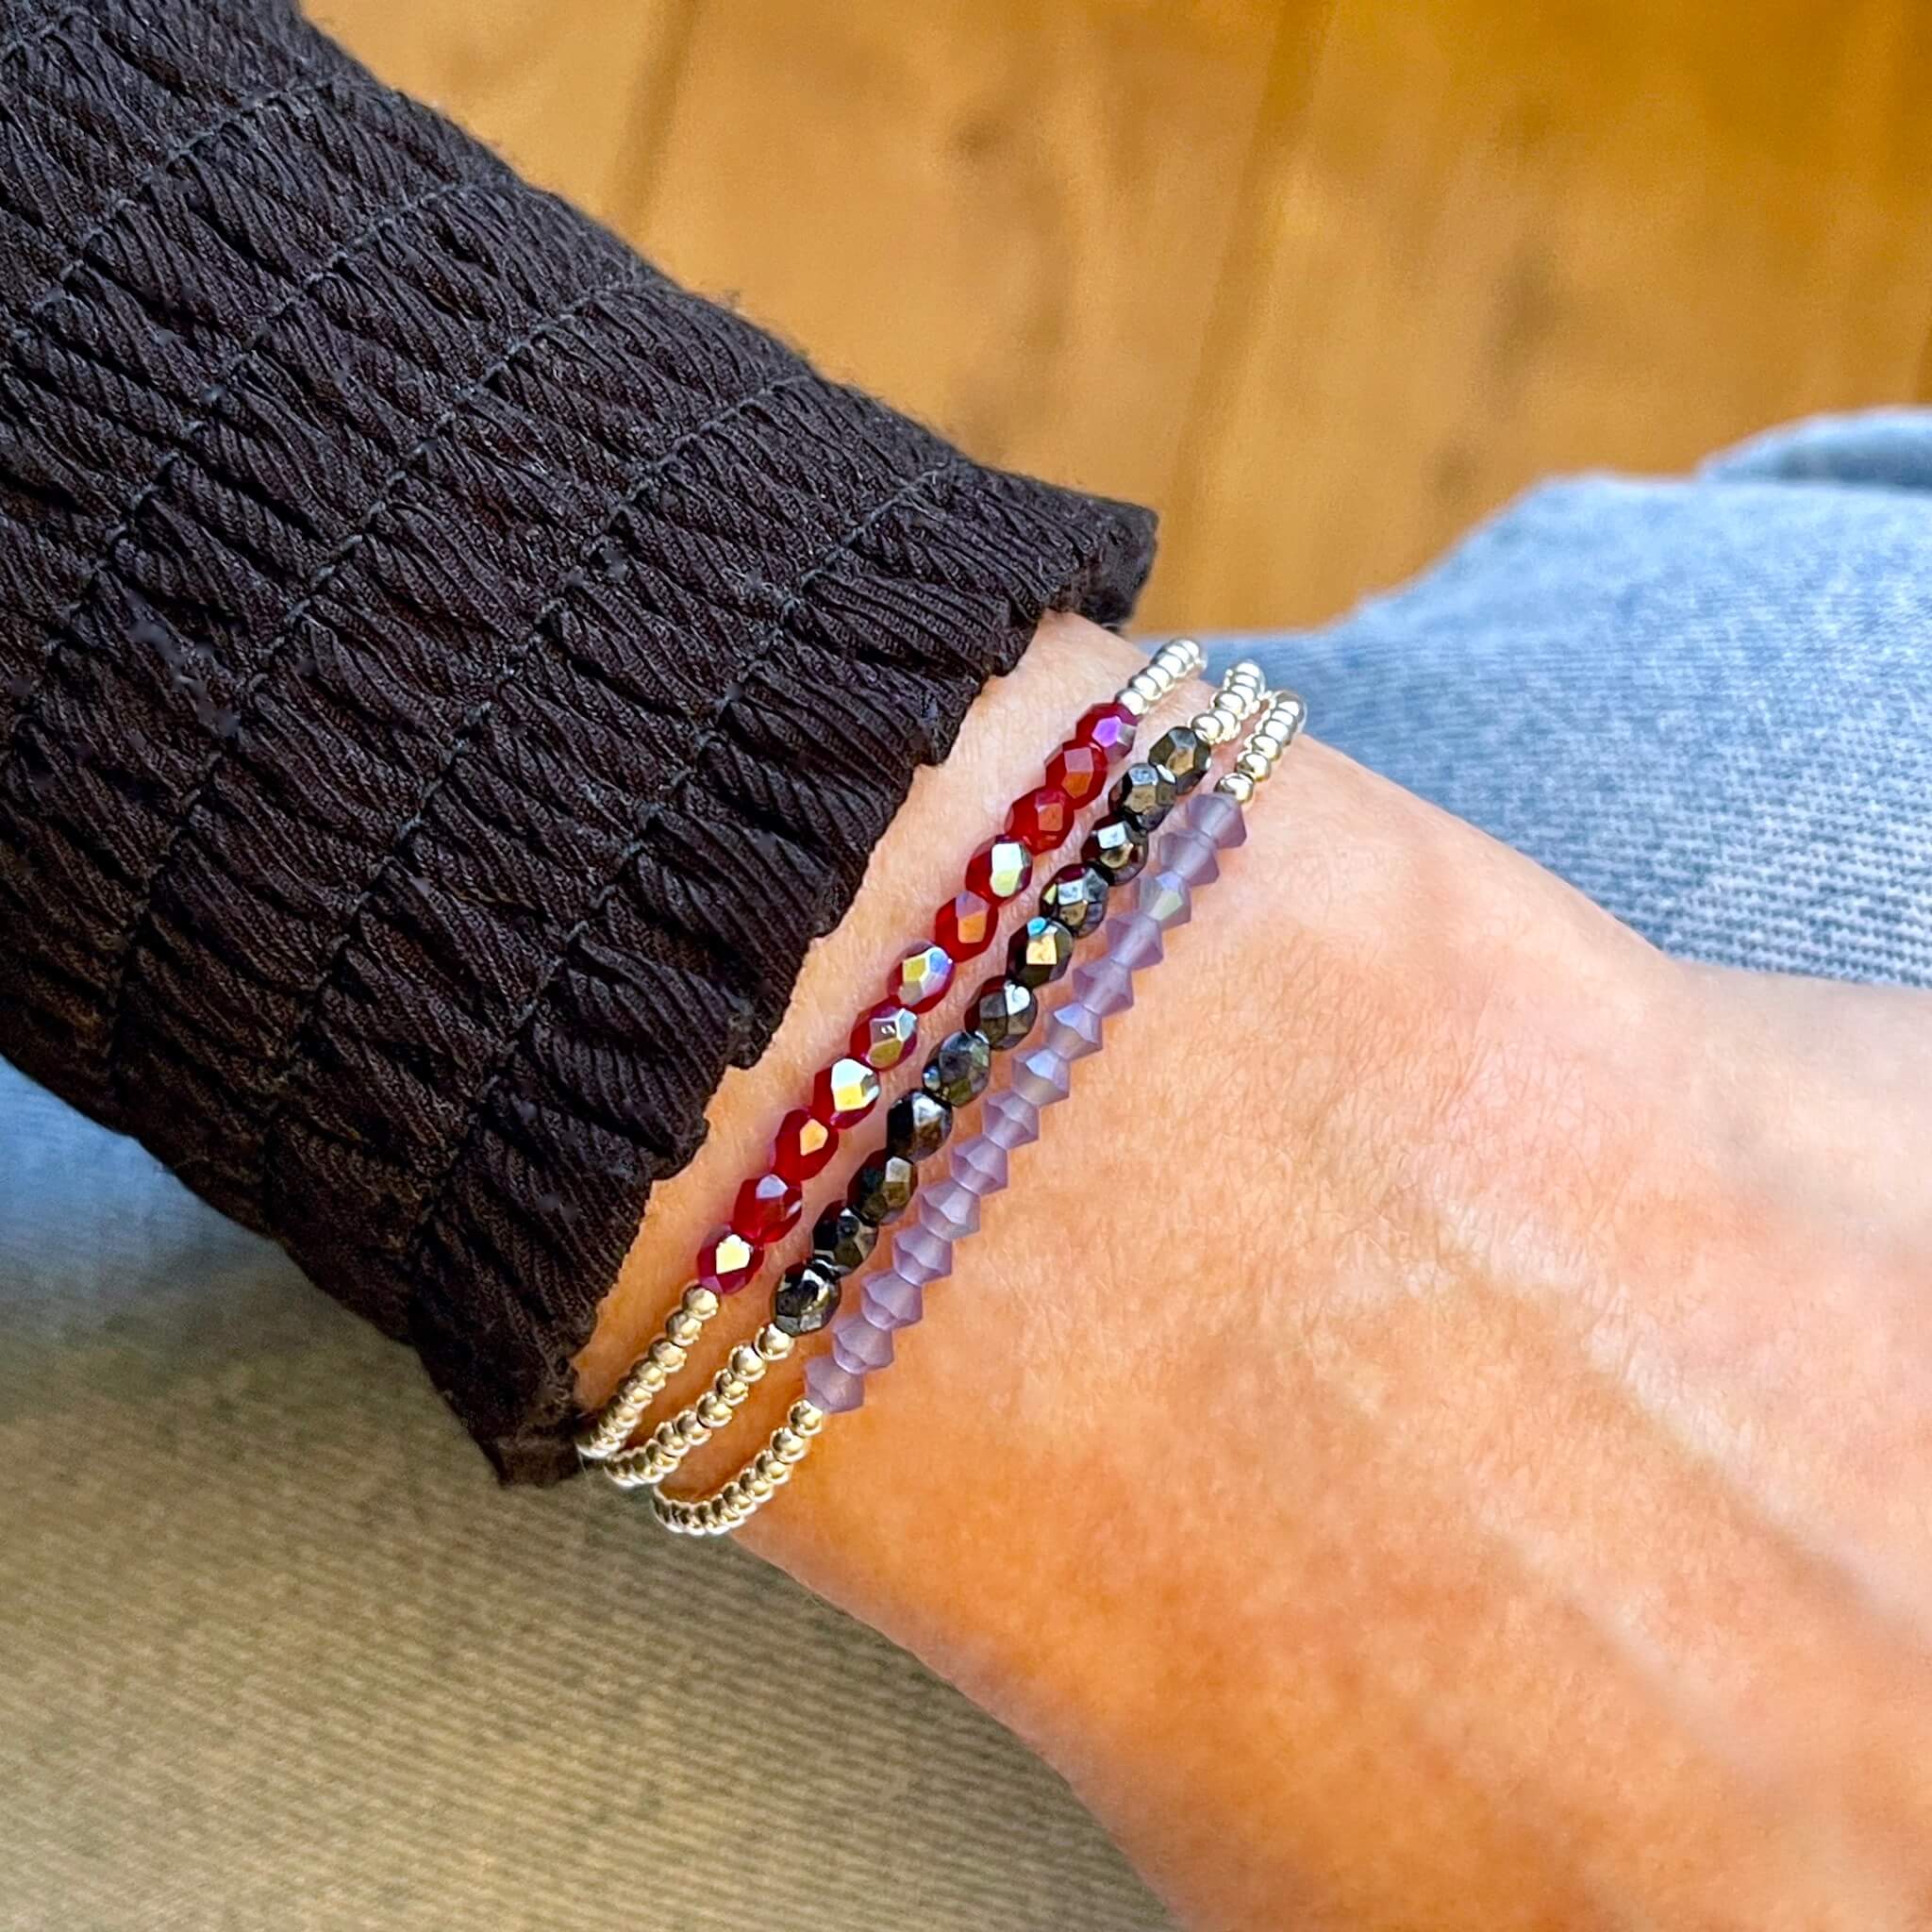 Natural Stone Meditation Beads Bracelet 6mm Width, Fashionable Mix Colors,  Elastic Copper Material, Antifatigue Drop, Unisex Design From Bde_jewelry,  $0.87 | DHgate.Com